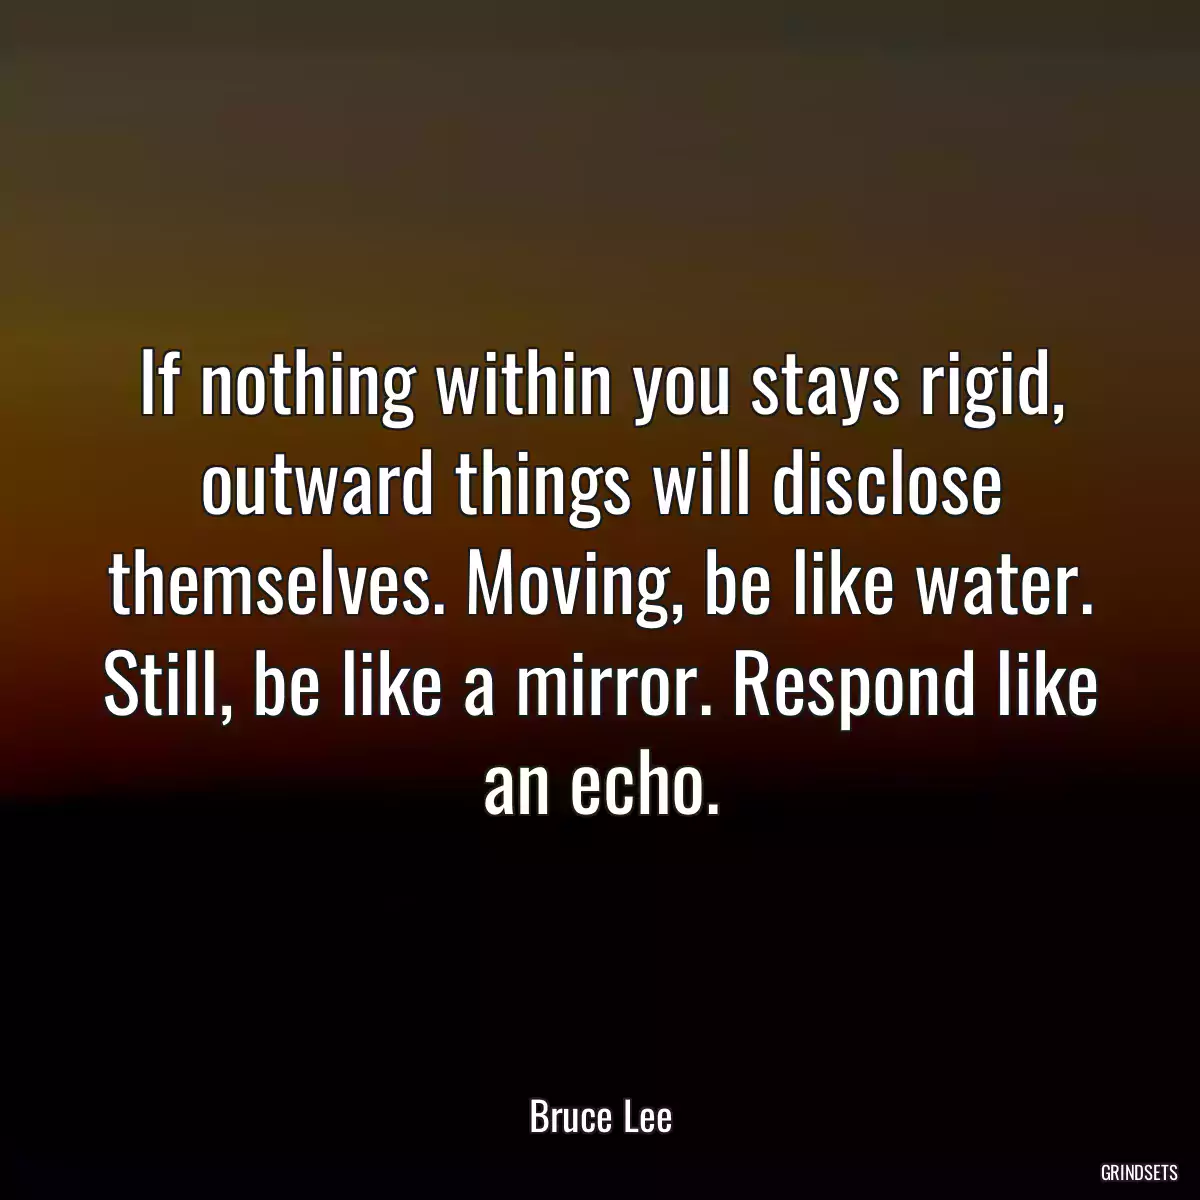 If nothing within you stays rigid, outward things will disclose themselves. Moving, be like water. Still, be like a mirror. Respond like an echo.